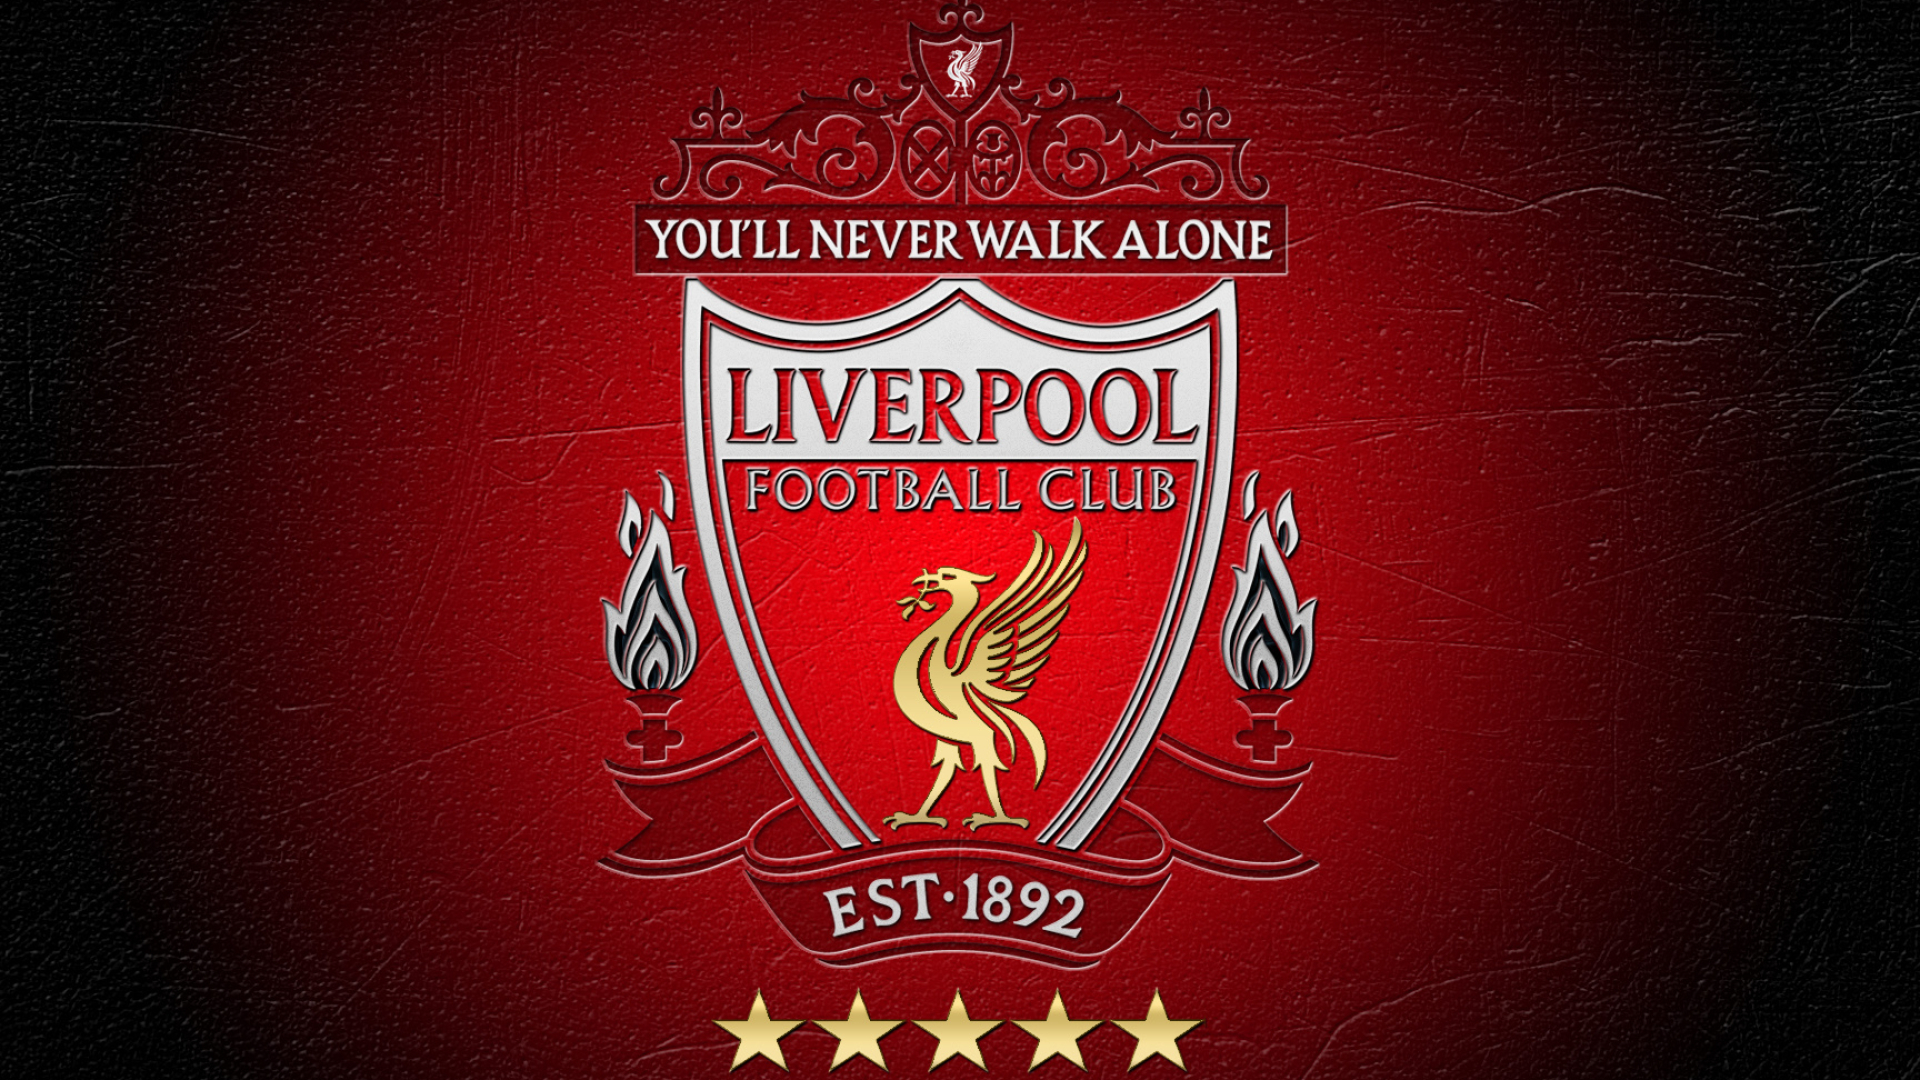 Liverpool FC, High-quality wallpapers, Reds' legacy, Football passion, 1920x1080 Full HD Desktop